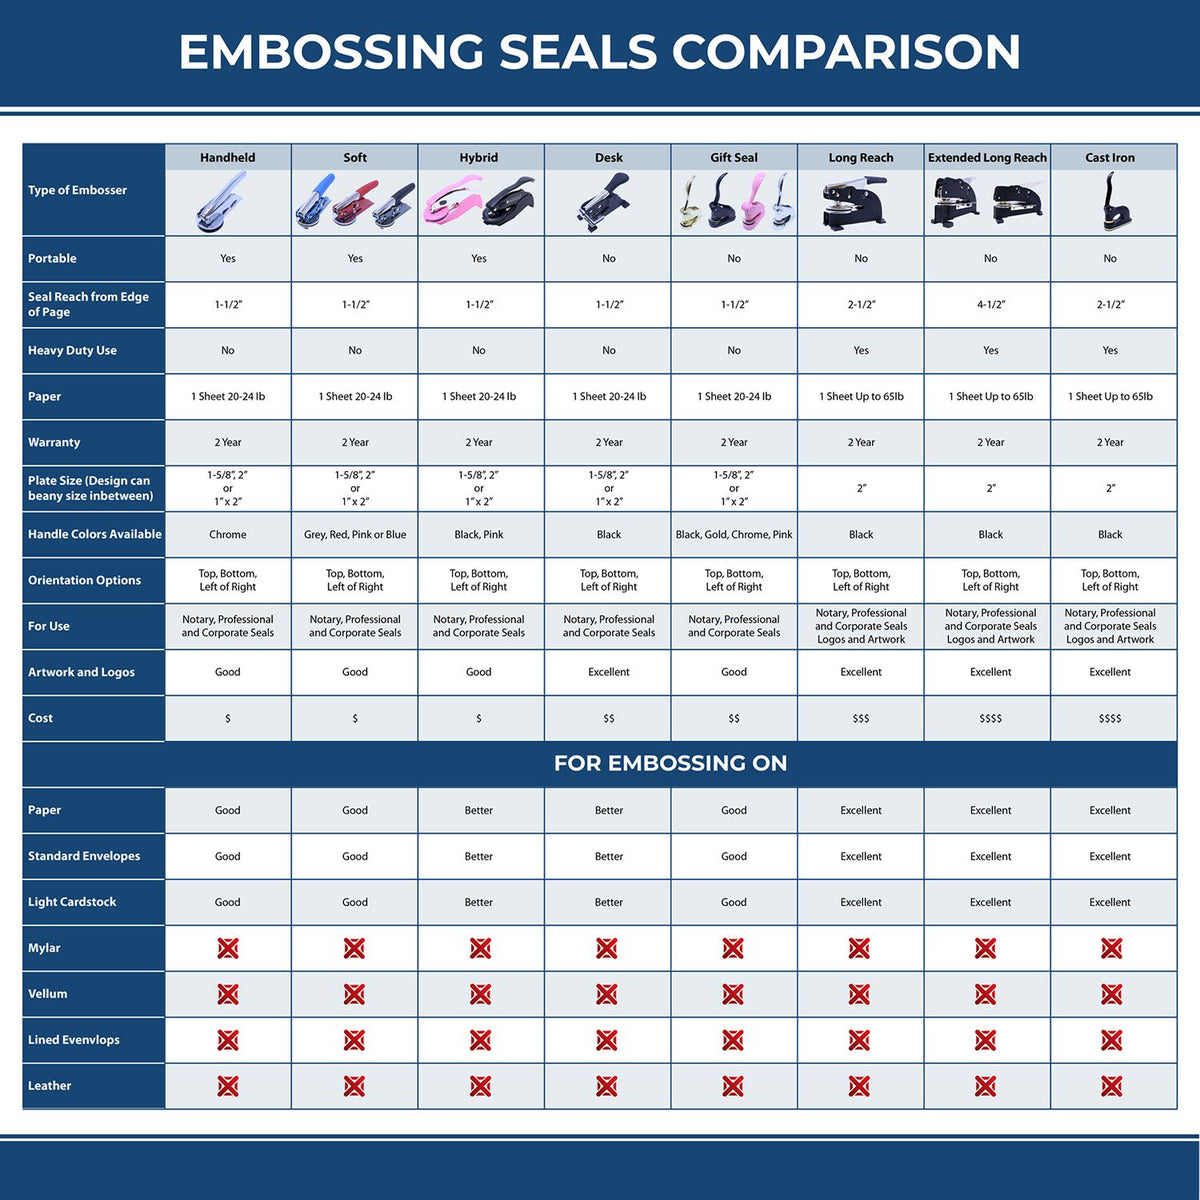 A comparison chart for the different types of mount models available for the State of North Dakota Extended Long Reach Engineer Seal.